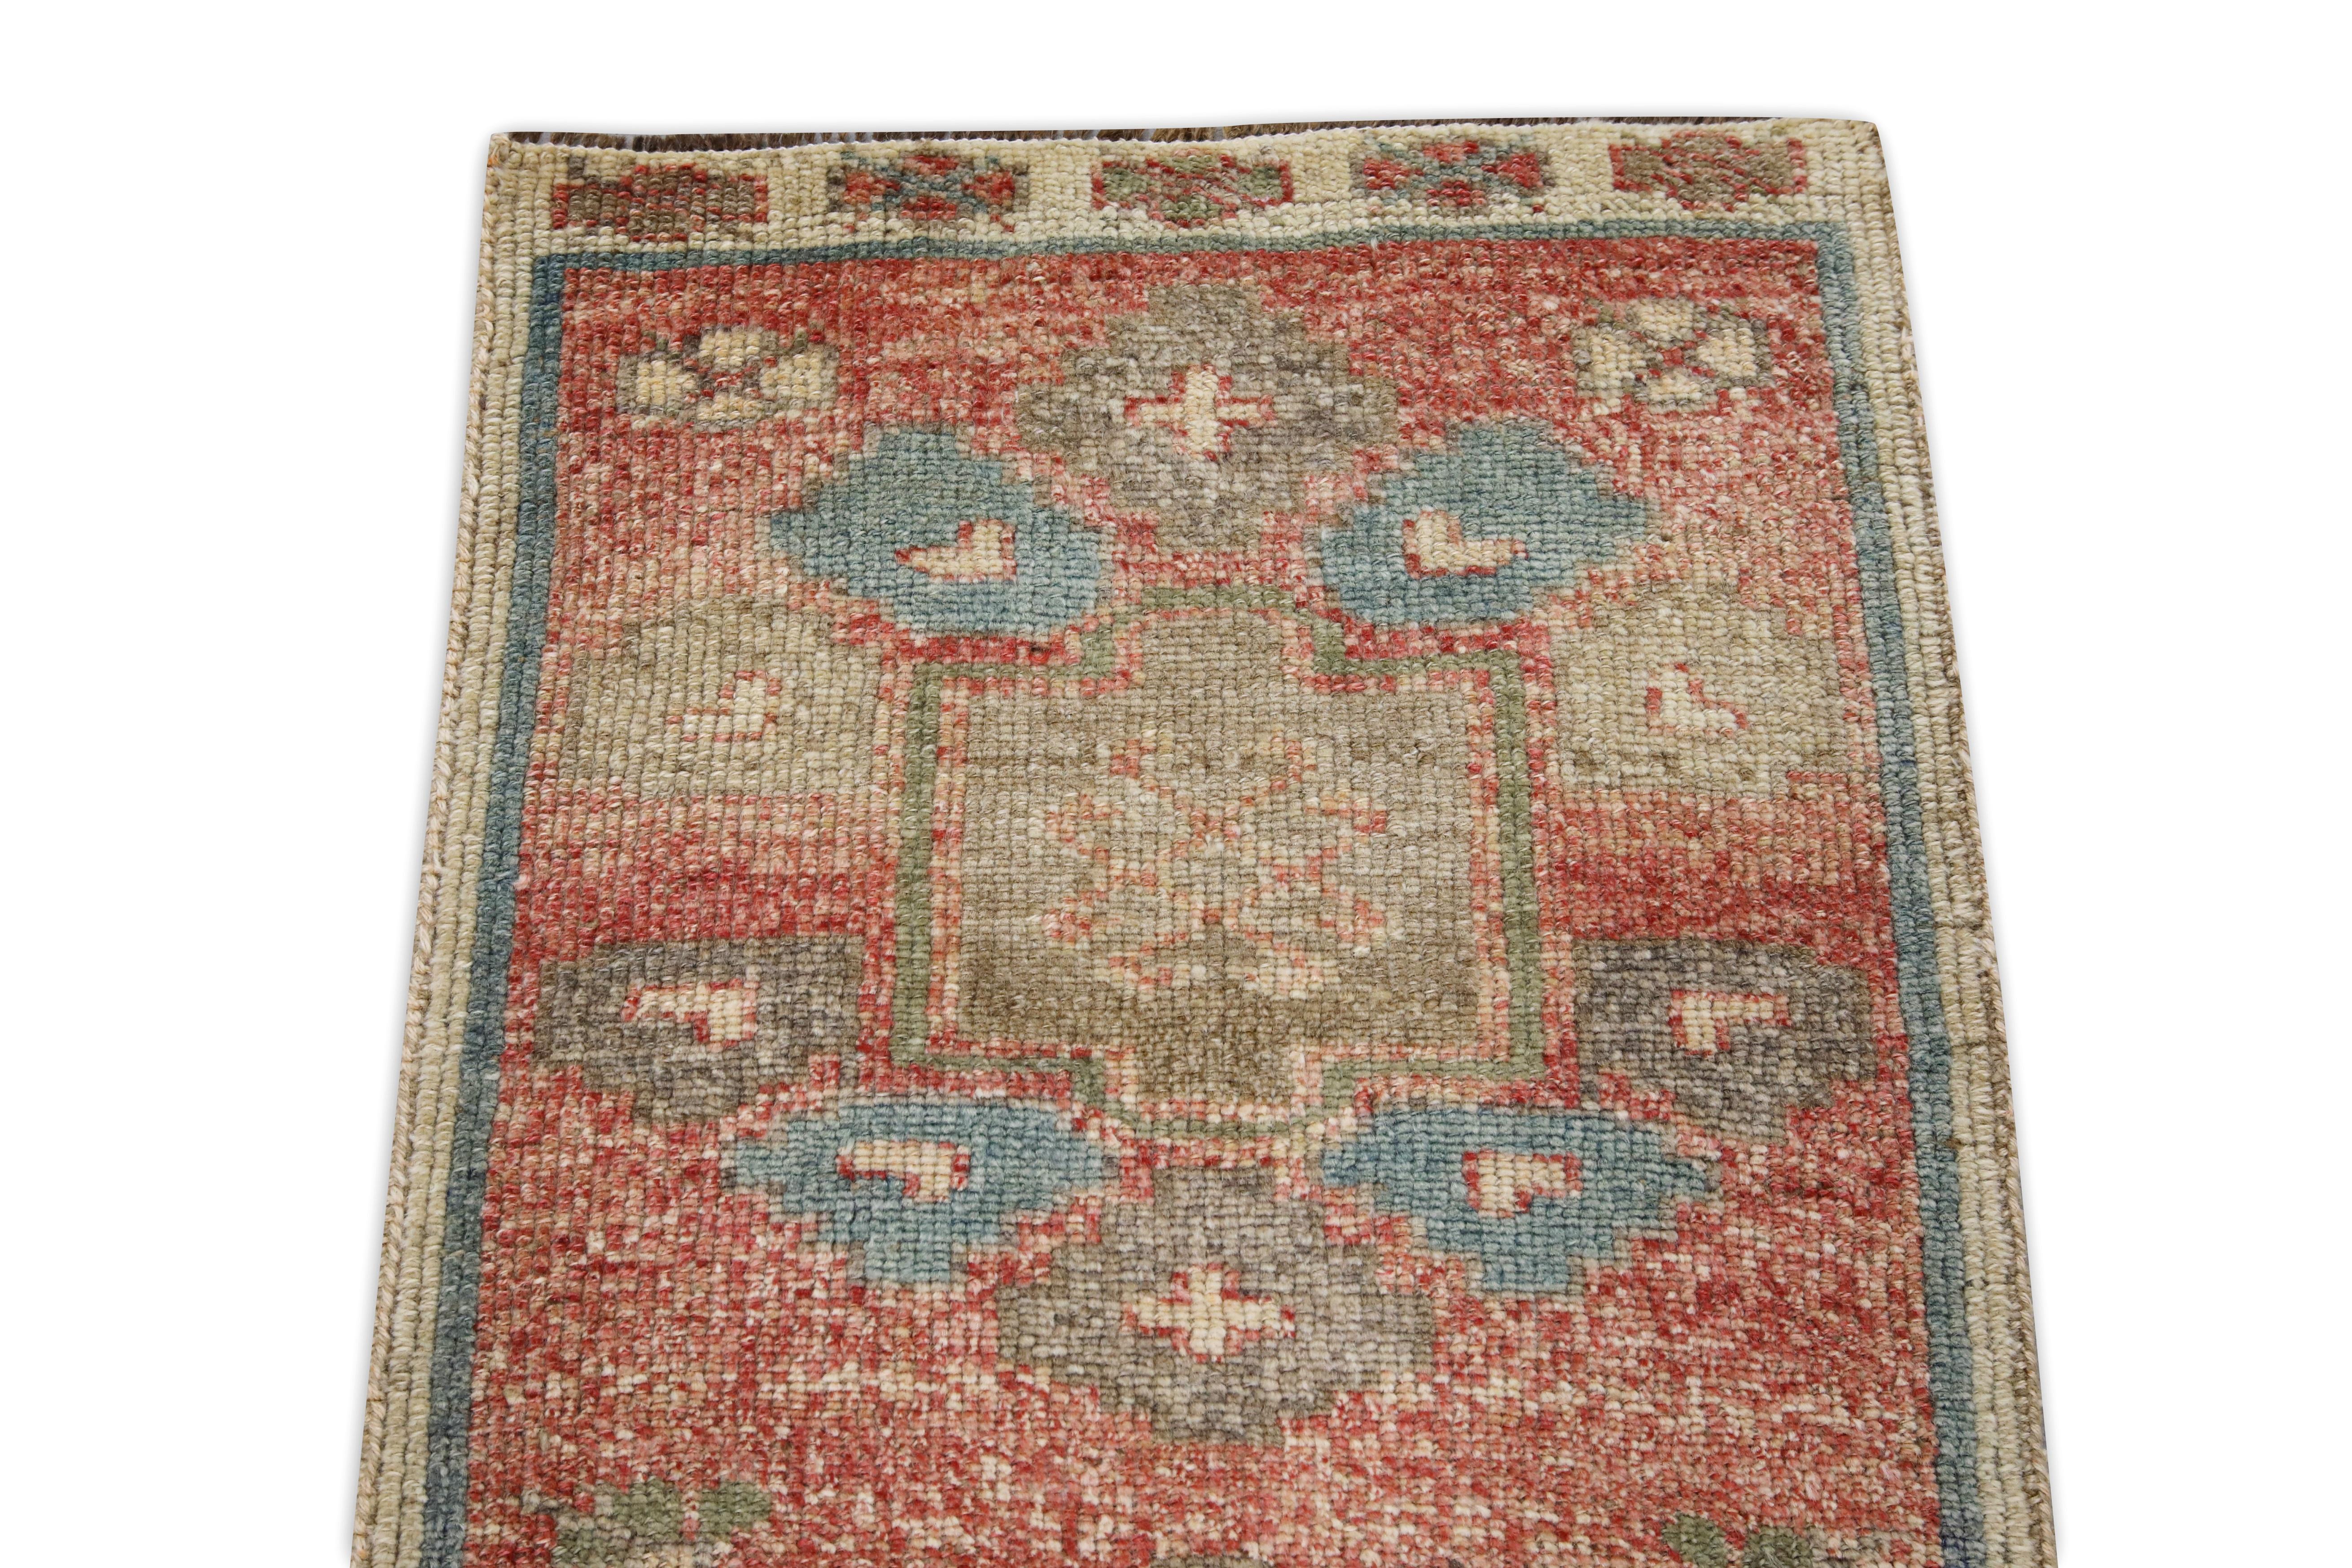 Hand-Woven 1960s Red & Blue Vintage Turkish Mini Rug 1'9